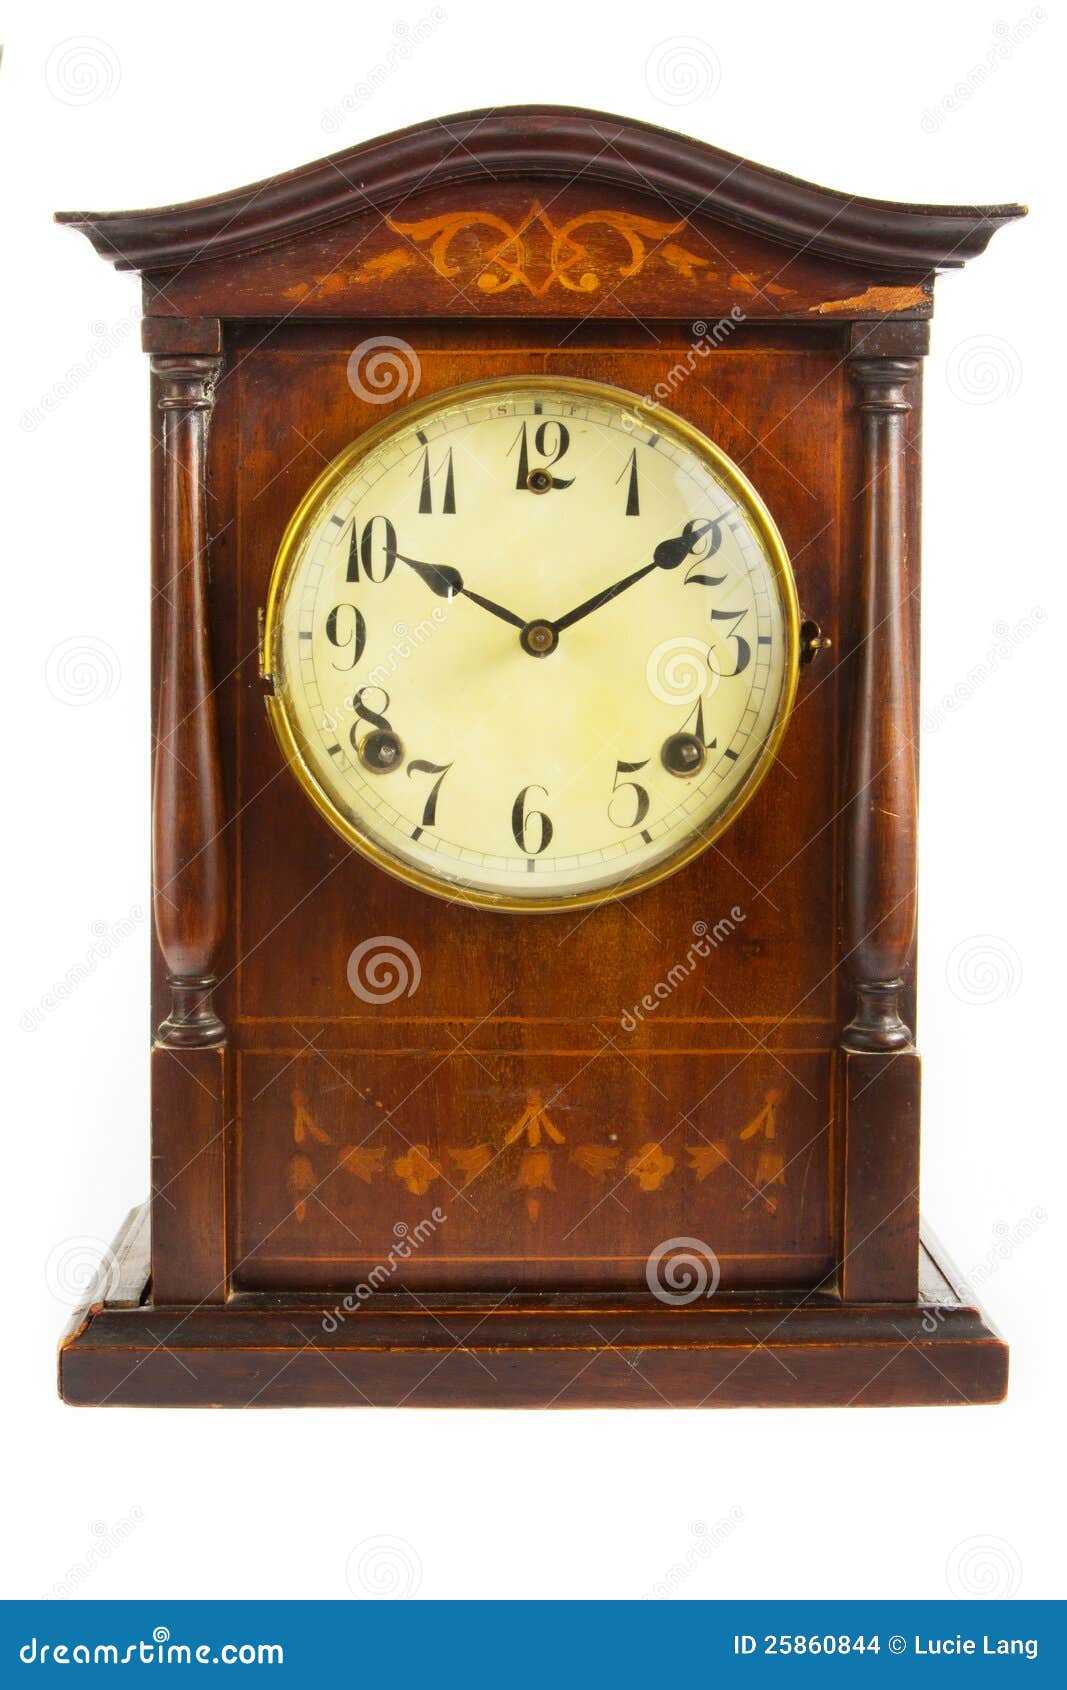 Old Antique Wooden Clock On White Stock Images - Image: 25860844